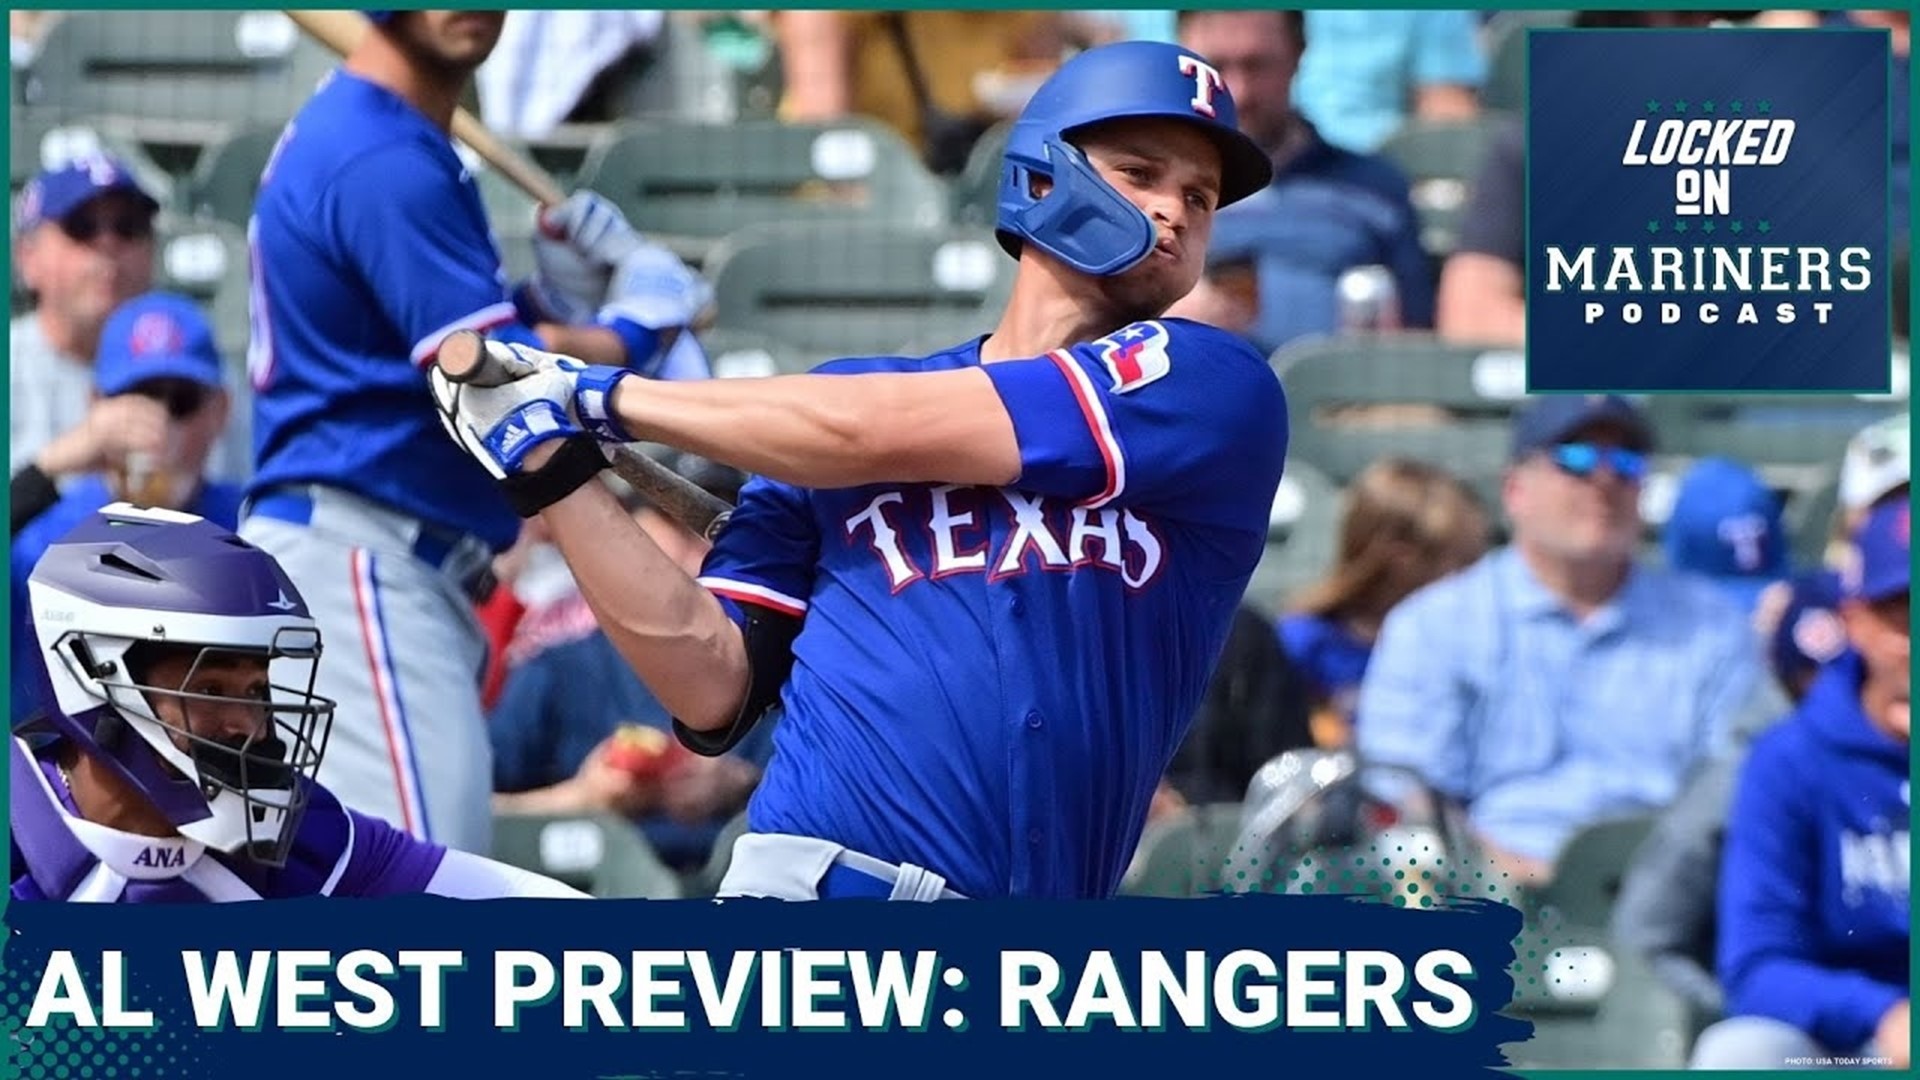 One year after spending big to land Corey Seager and Marcus Semien, the Rangers pulled out the checkbook again to overhaul their rotation in a major way.